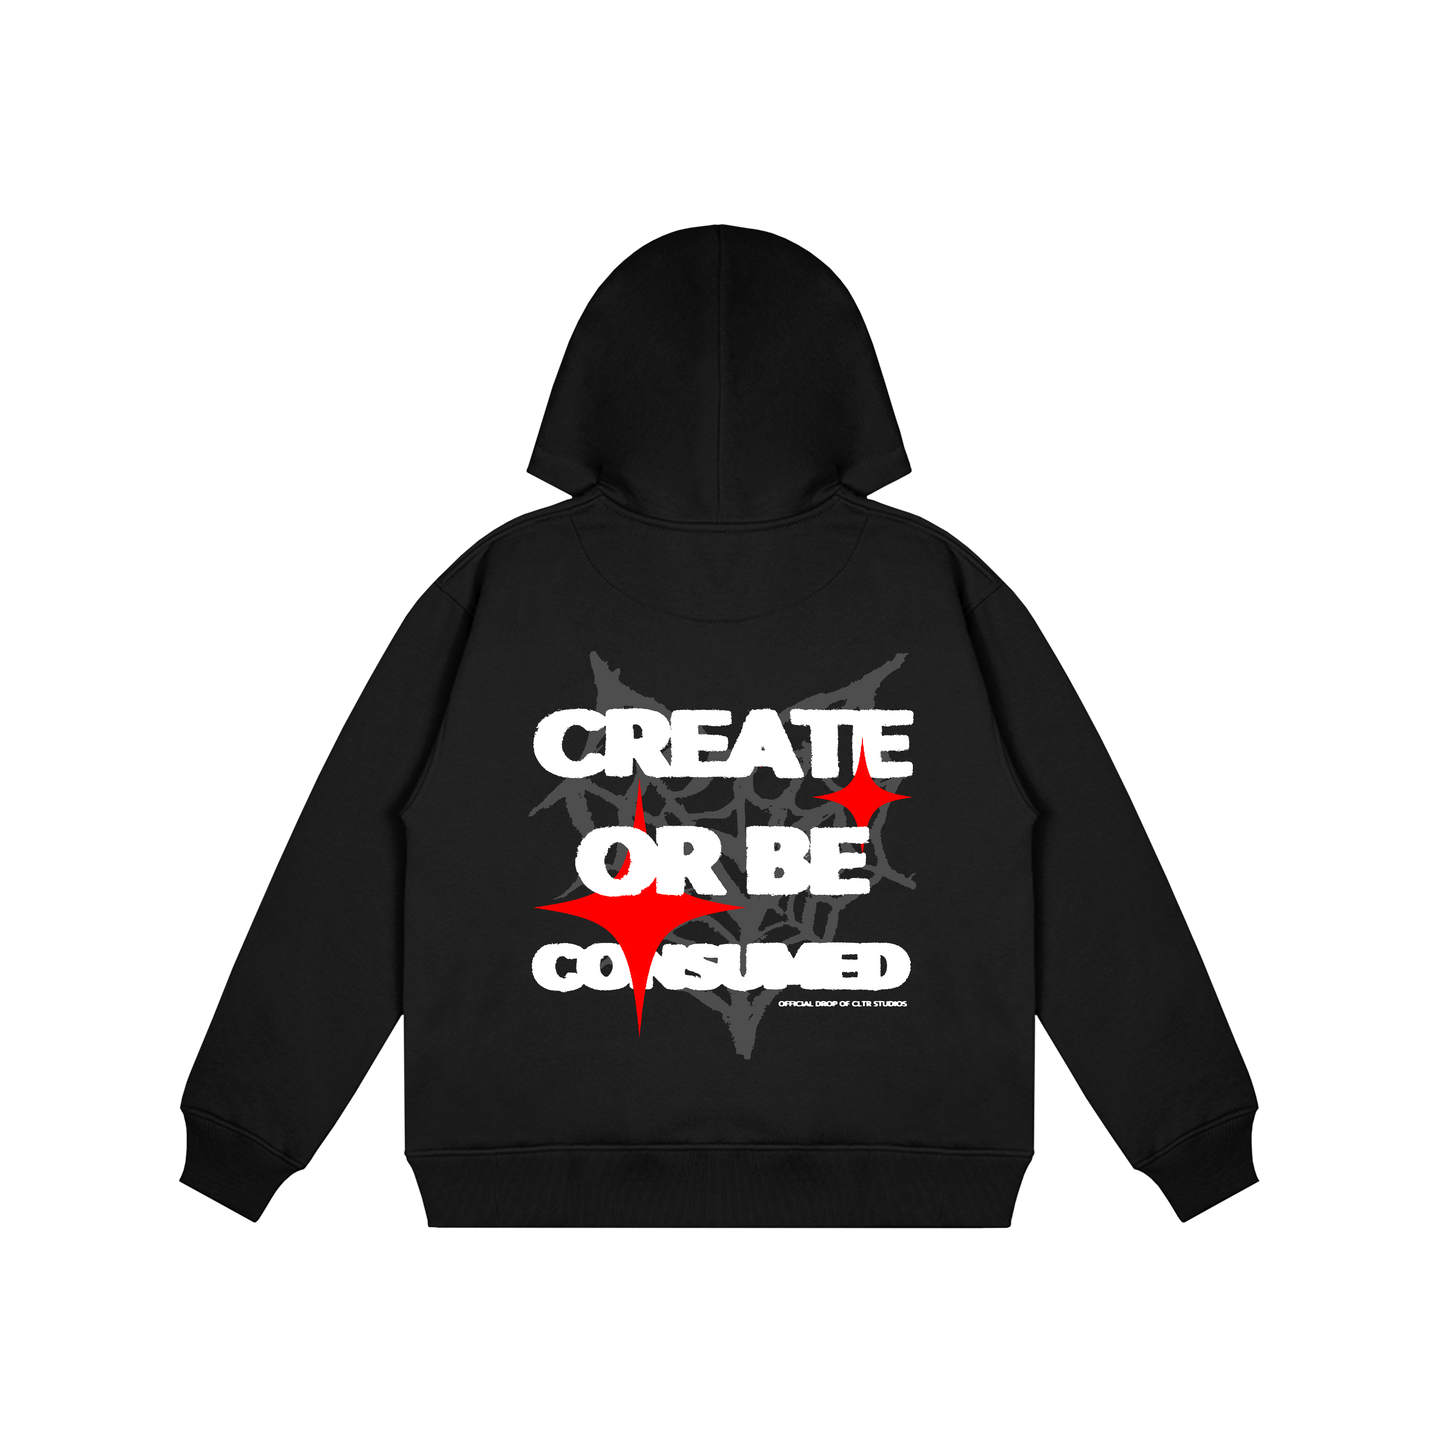 CREATE OR BE CONSUMED